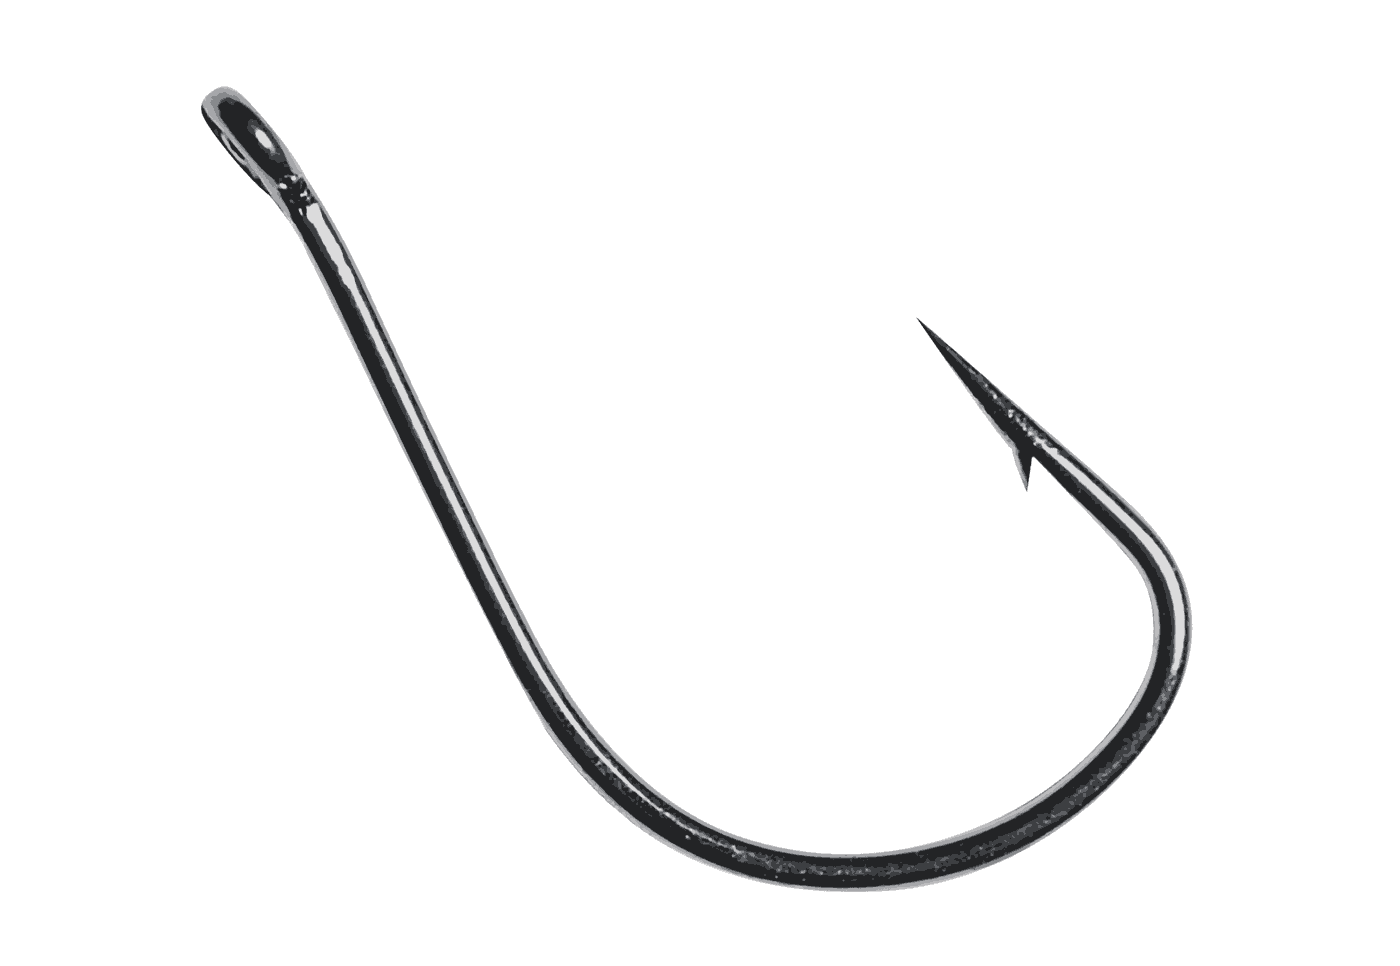 Owner Mosquito Bass Hook #2 Forged Shank Light Wire Black Chrome 51/Pk 5377-091 